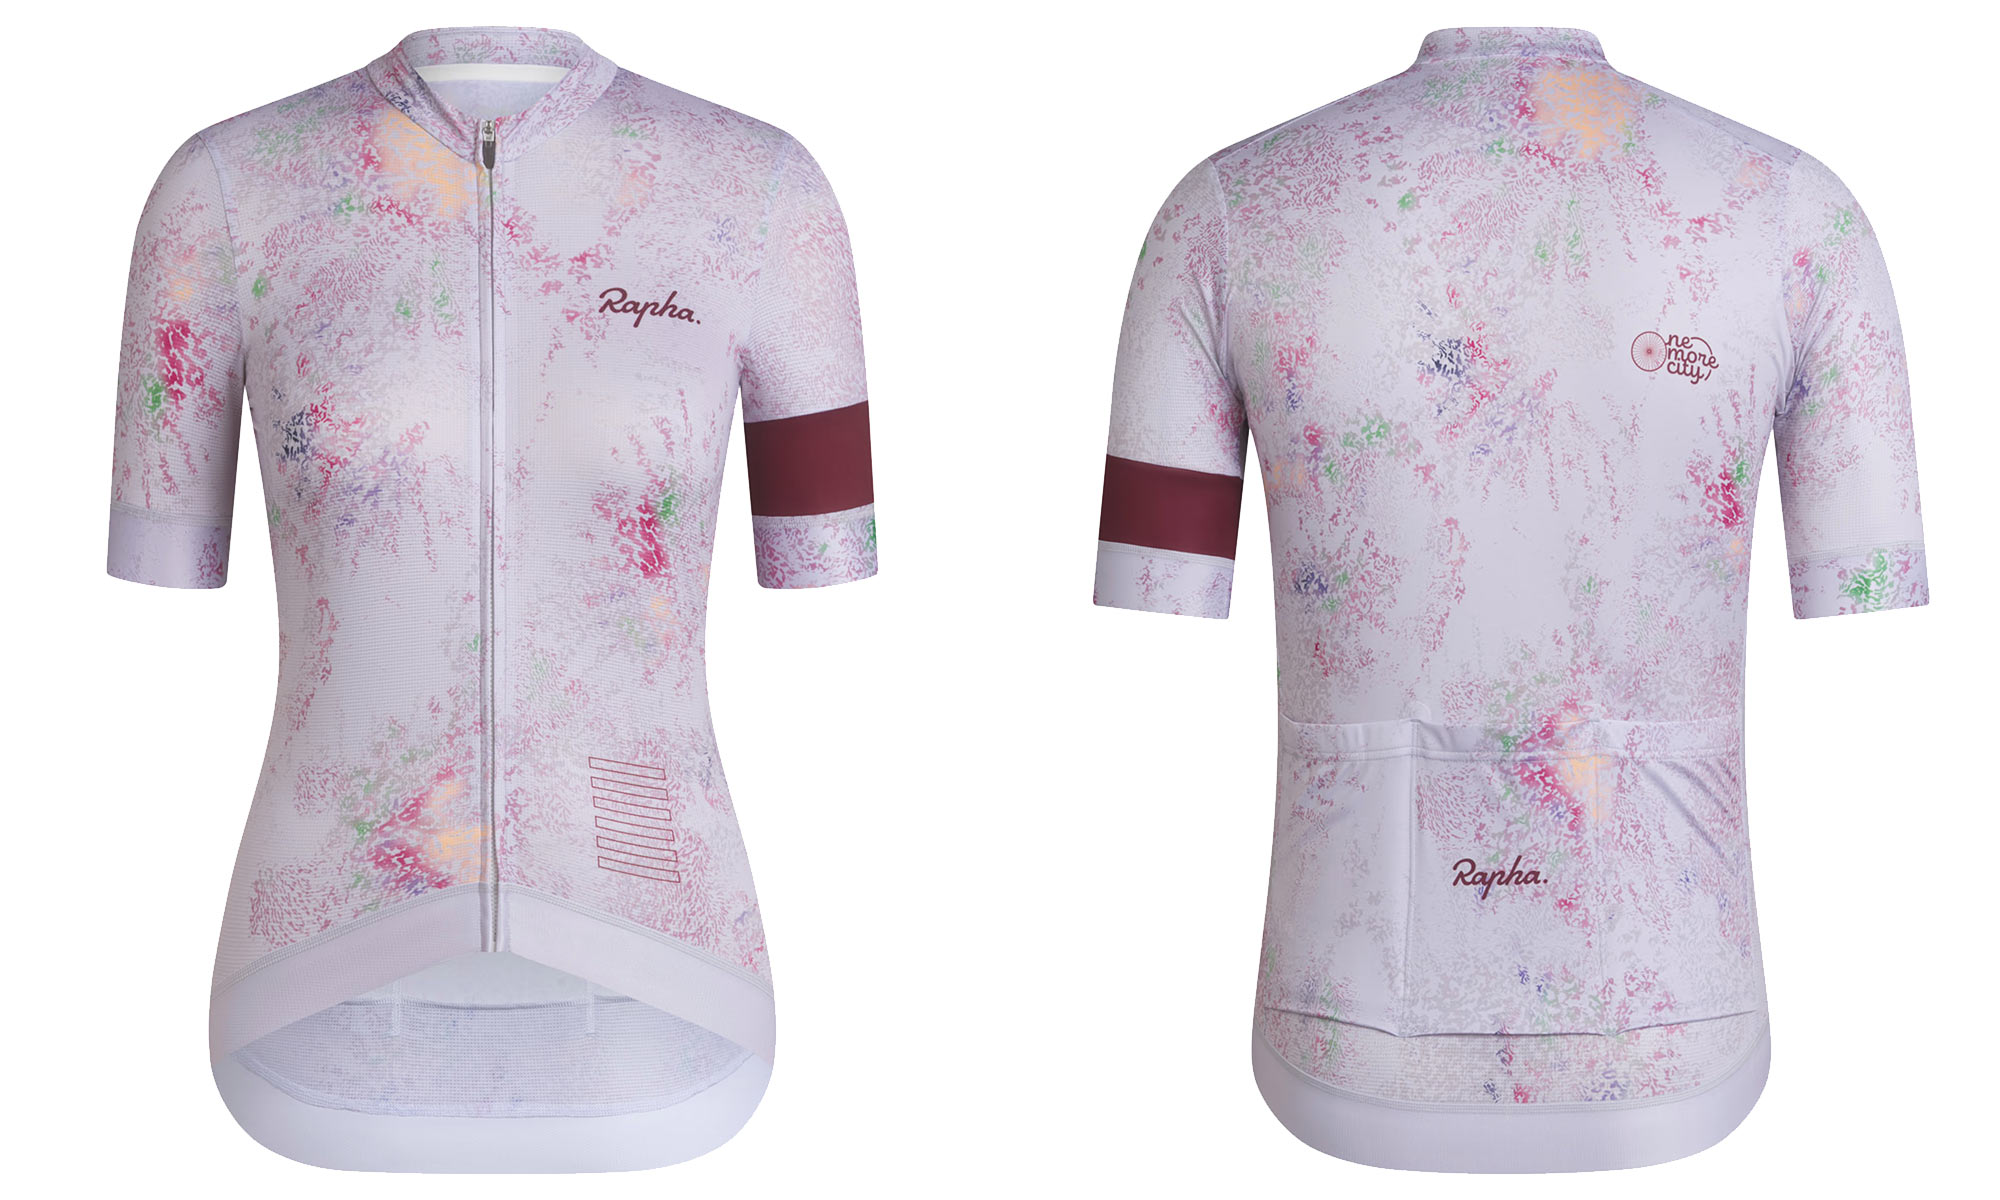 Rapha One More City kit supports secondary breast cancer research, Christine O'Connell, jerseys